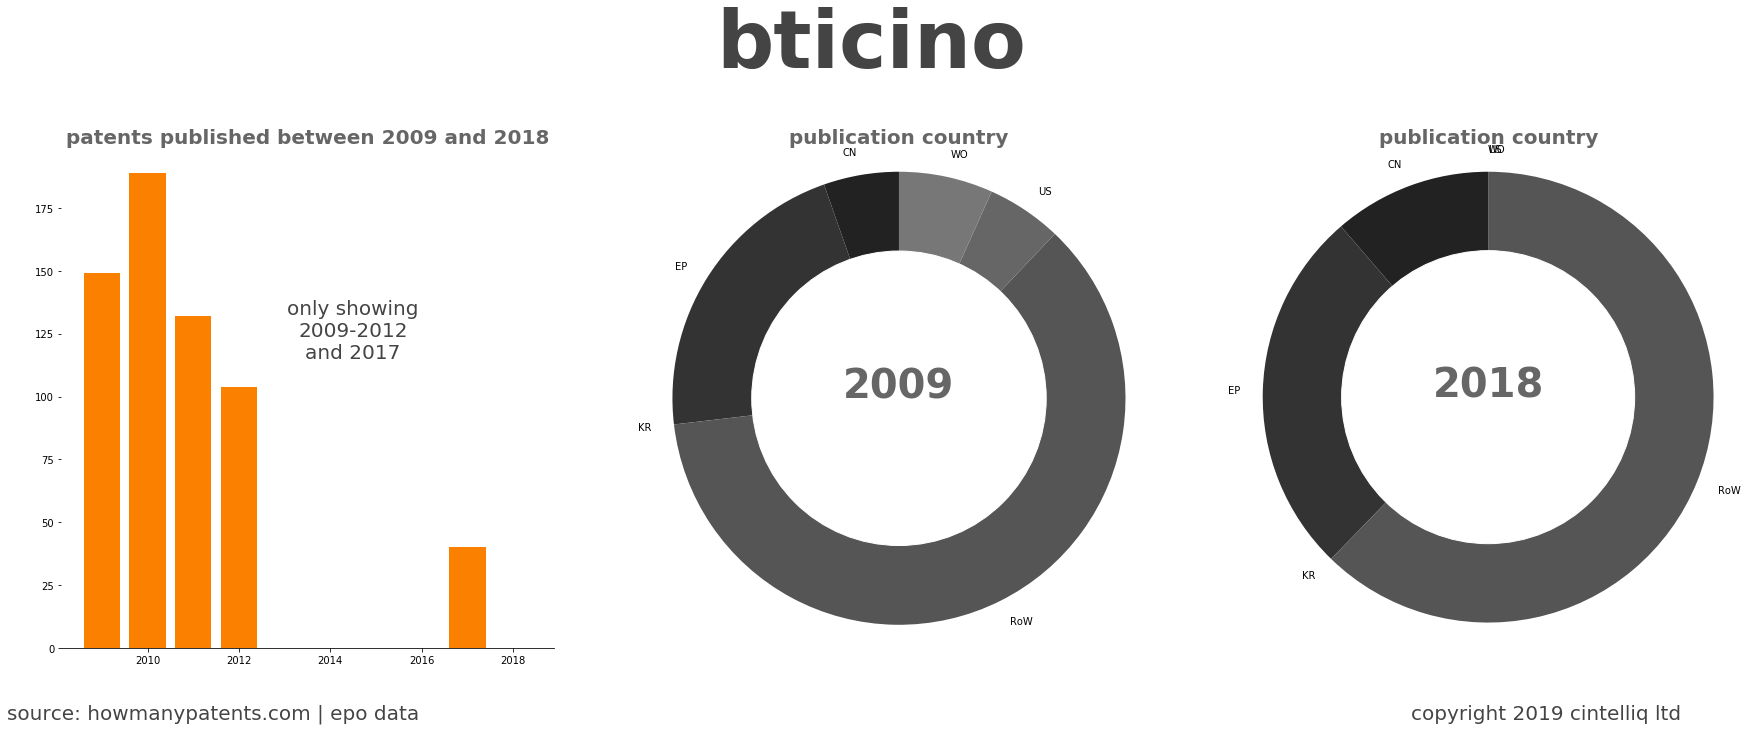 summary of patents for Bticino